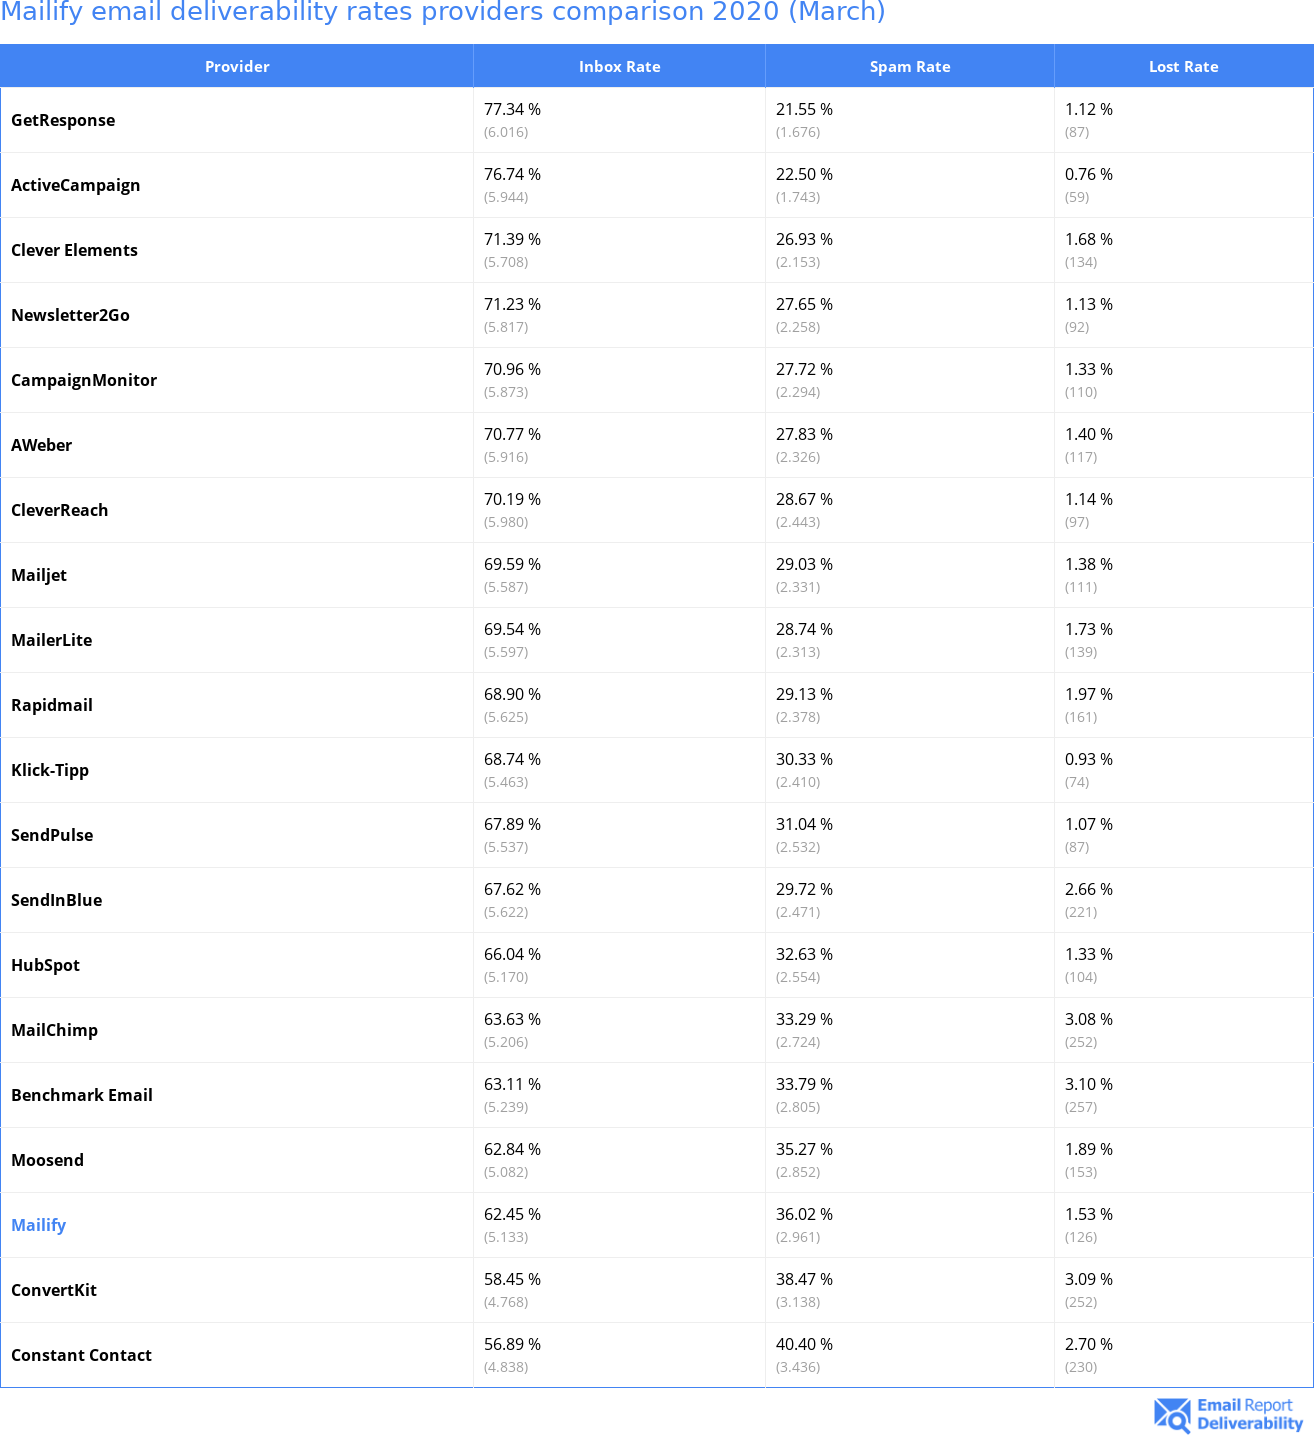 Mailify email deliverability rates providers comparison 2020 (March)